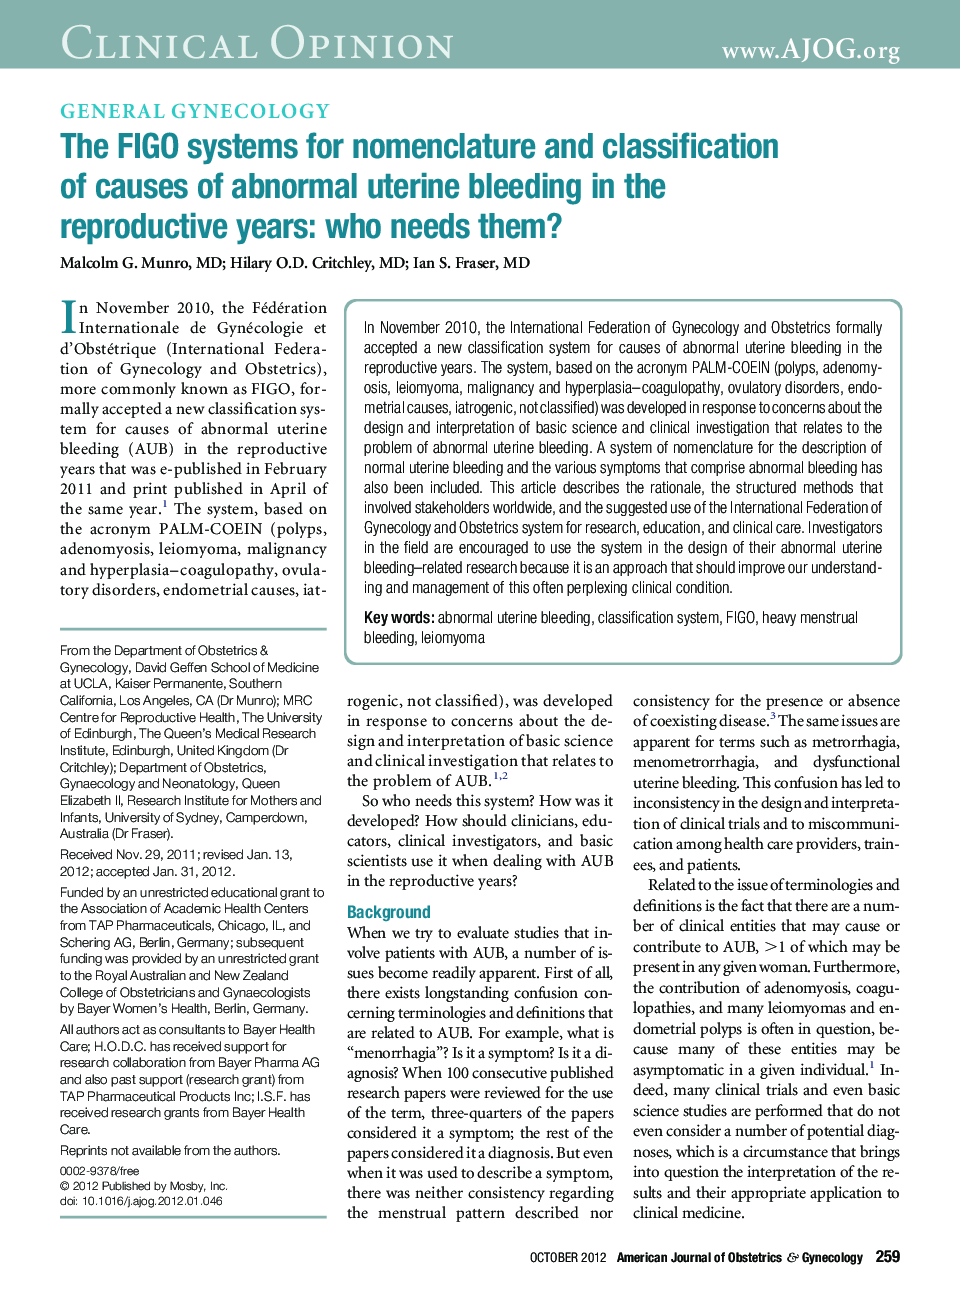 The FIGO systems for nomenclature and classification of causes of abnormal uterine bleeding in the reproductive years: who needs them? 